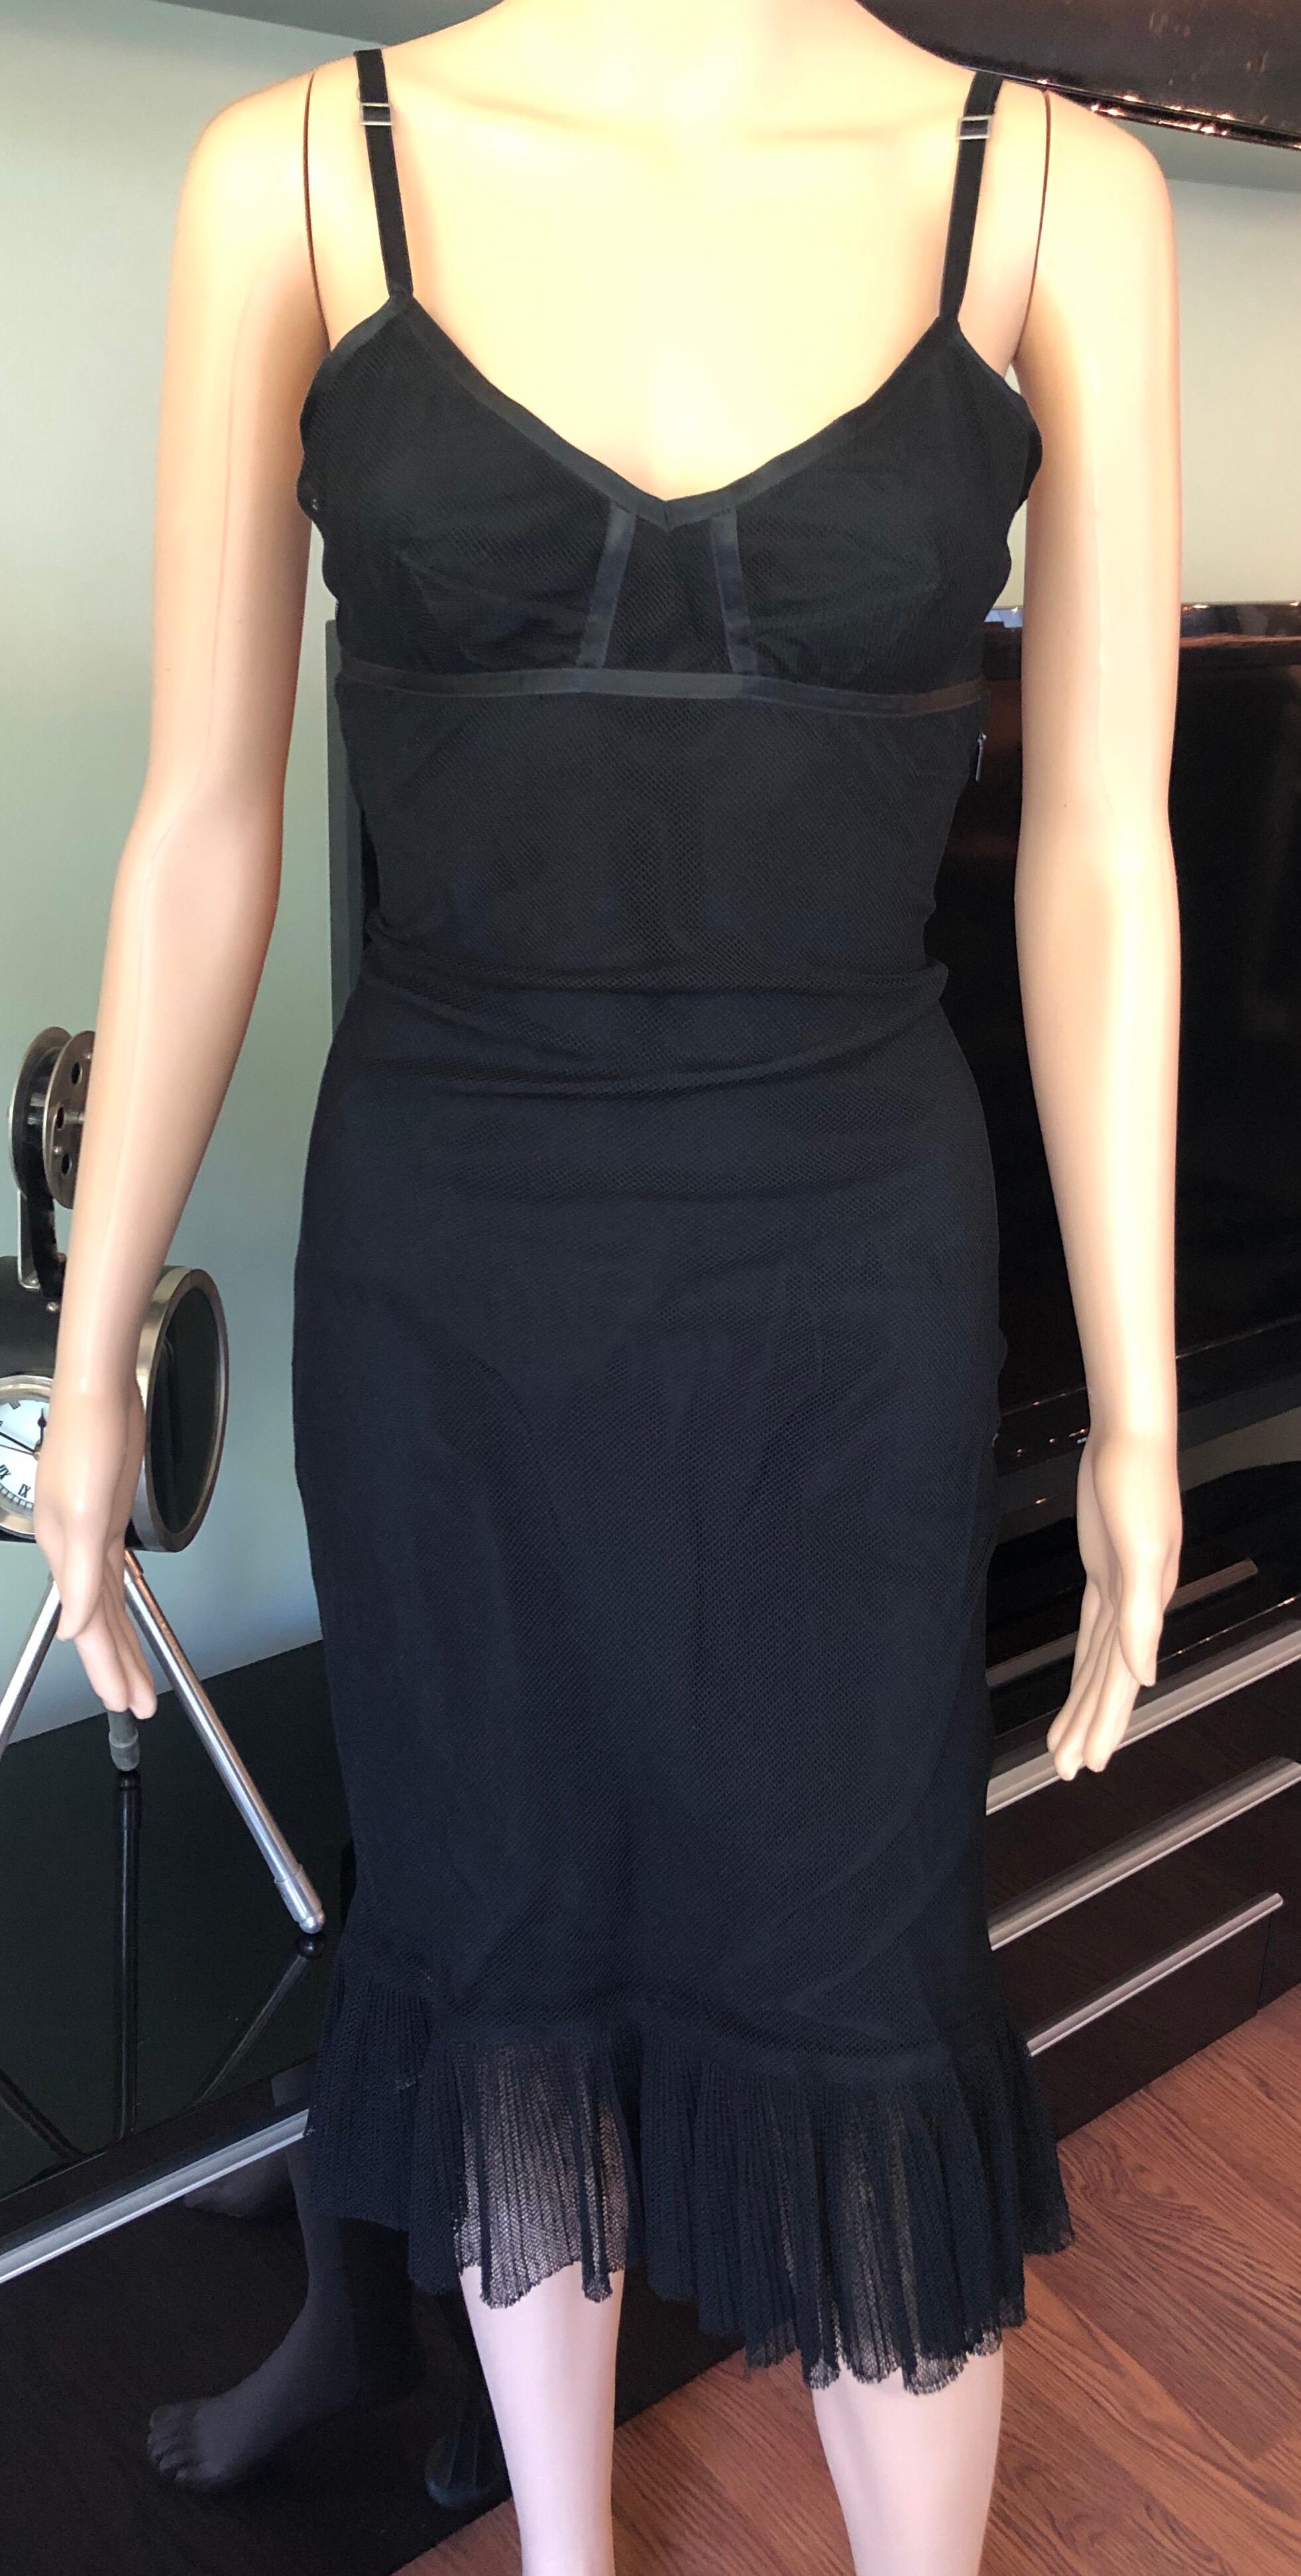 Gucci by Tom Ford F/W 2001 Cutout Back Mesh Black Dress In Excellent Condition For Sale In Naples, FL